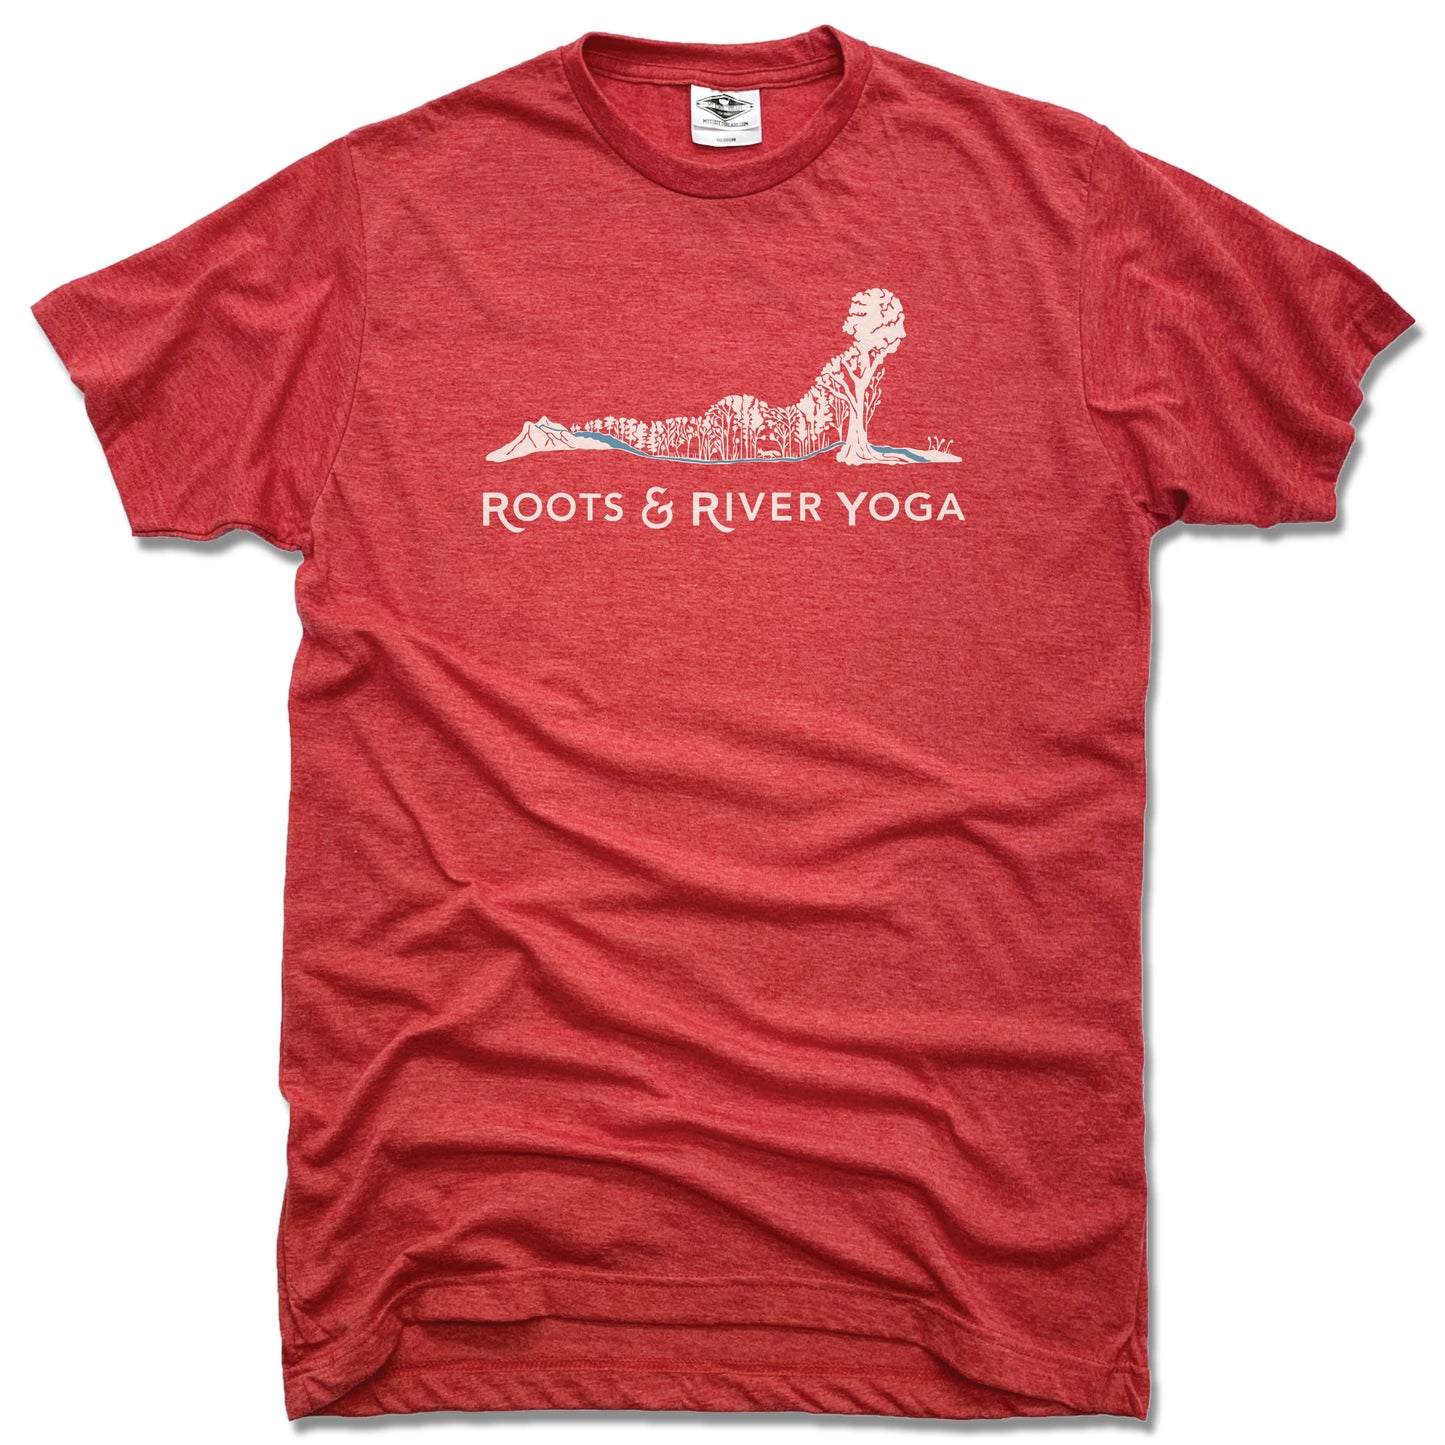 ROOTS & RIVER YOGA | UNISEX RED TEE | WHITE LOGO